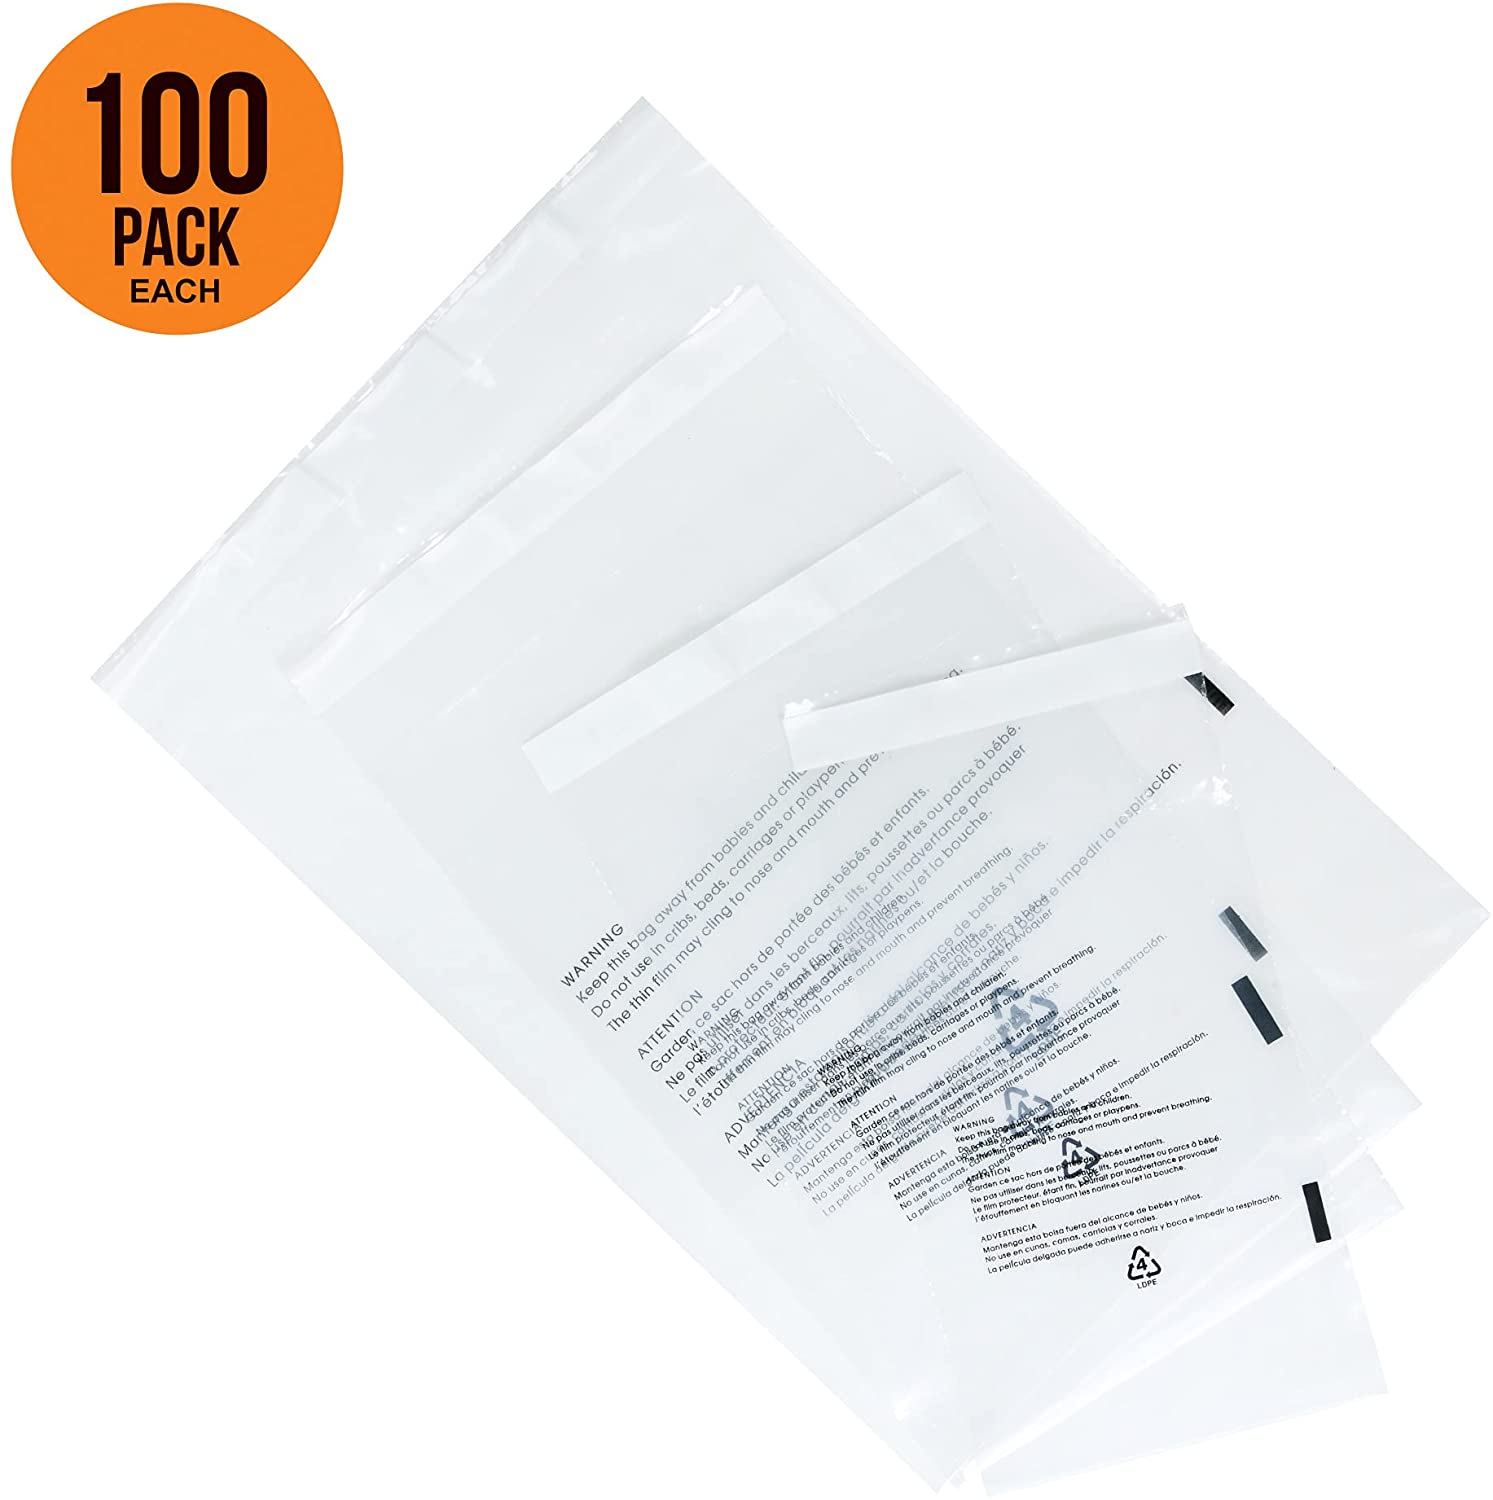 InfinitePack Small Combo Clear Plastic Poly Bags with Permanent Self Seal - Clear Poly Mailers with Suffocation Warning - 100 Pack for Each Sizes - Infinite Pack